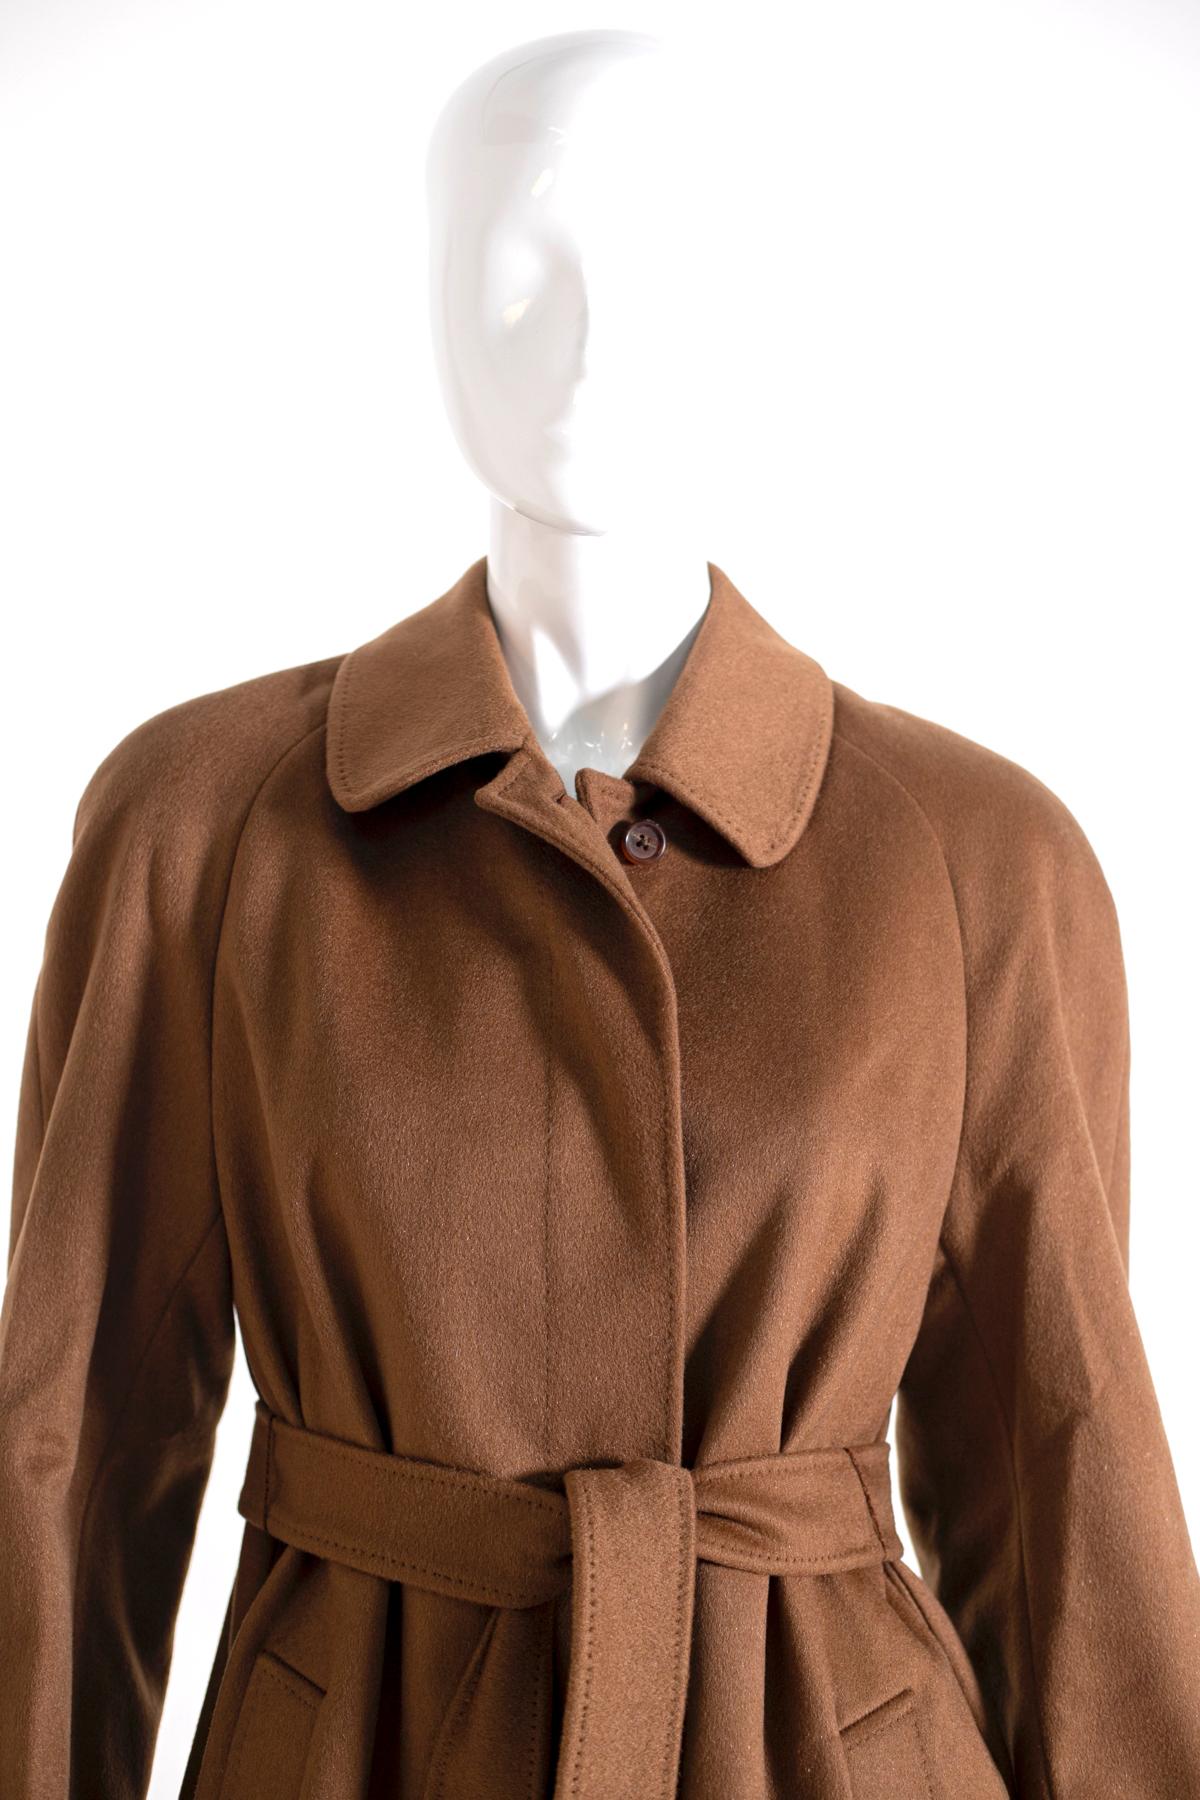 Aquascutum coat for women from the 90s, brown color, made of 100% pure Cashmere. 
Classic line, with five buttons on the front and two comfortable pockets, ankle-length with adjustable matching belt. Inside is lined in 100% viscose and rayon.

About